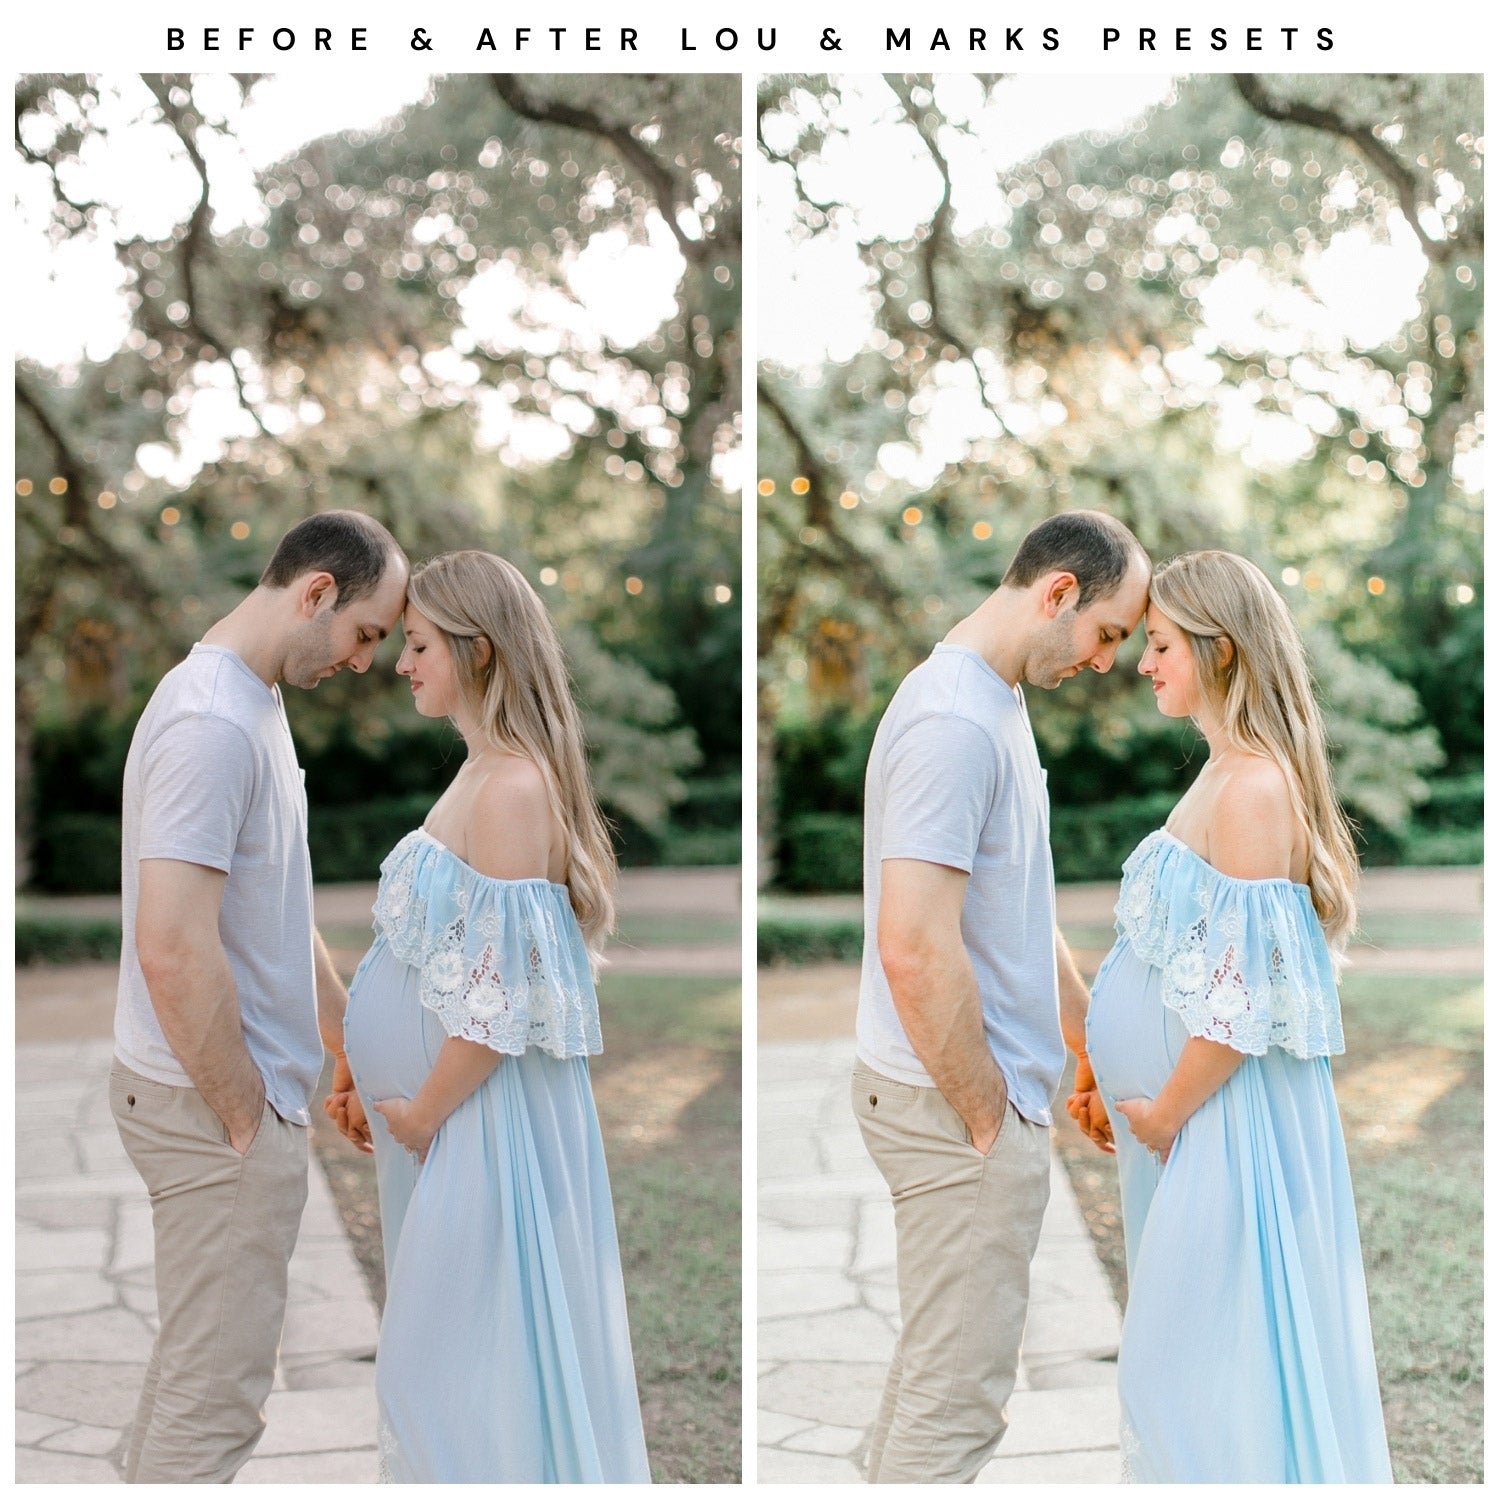 Lou & Marks Presets Light And Airy Lightroom Presets Bundle The Best Presets Maternity